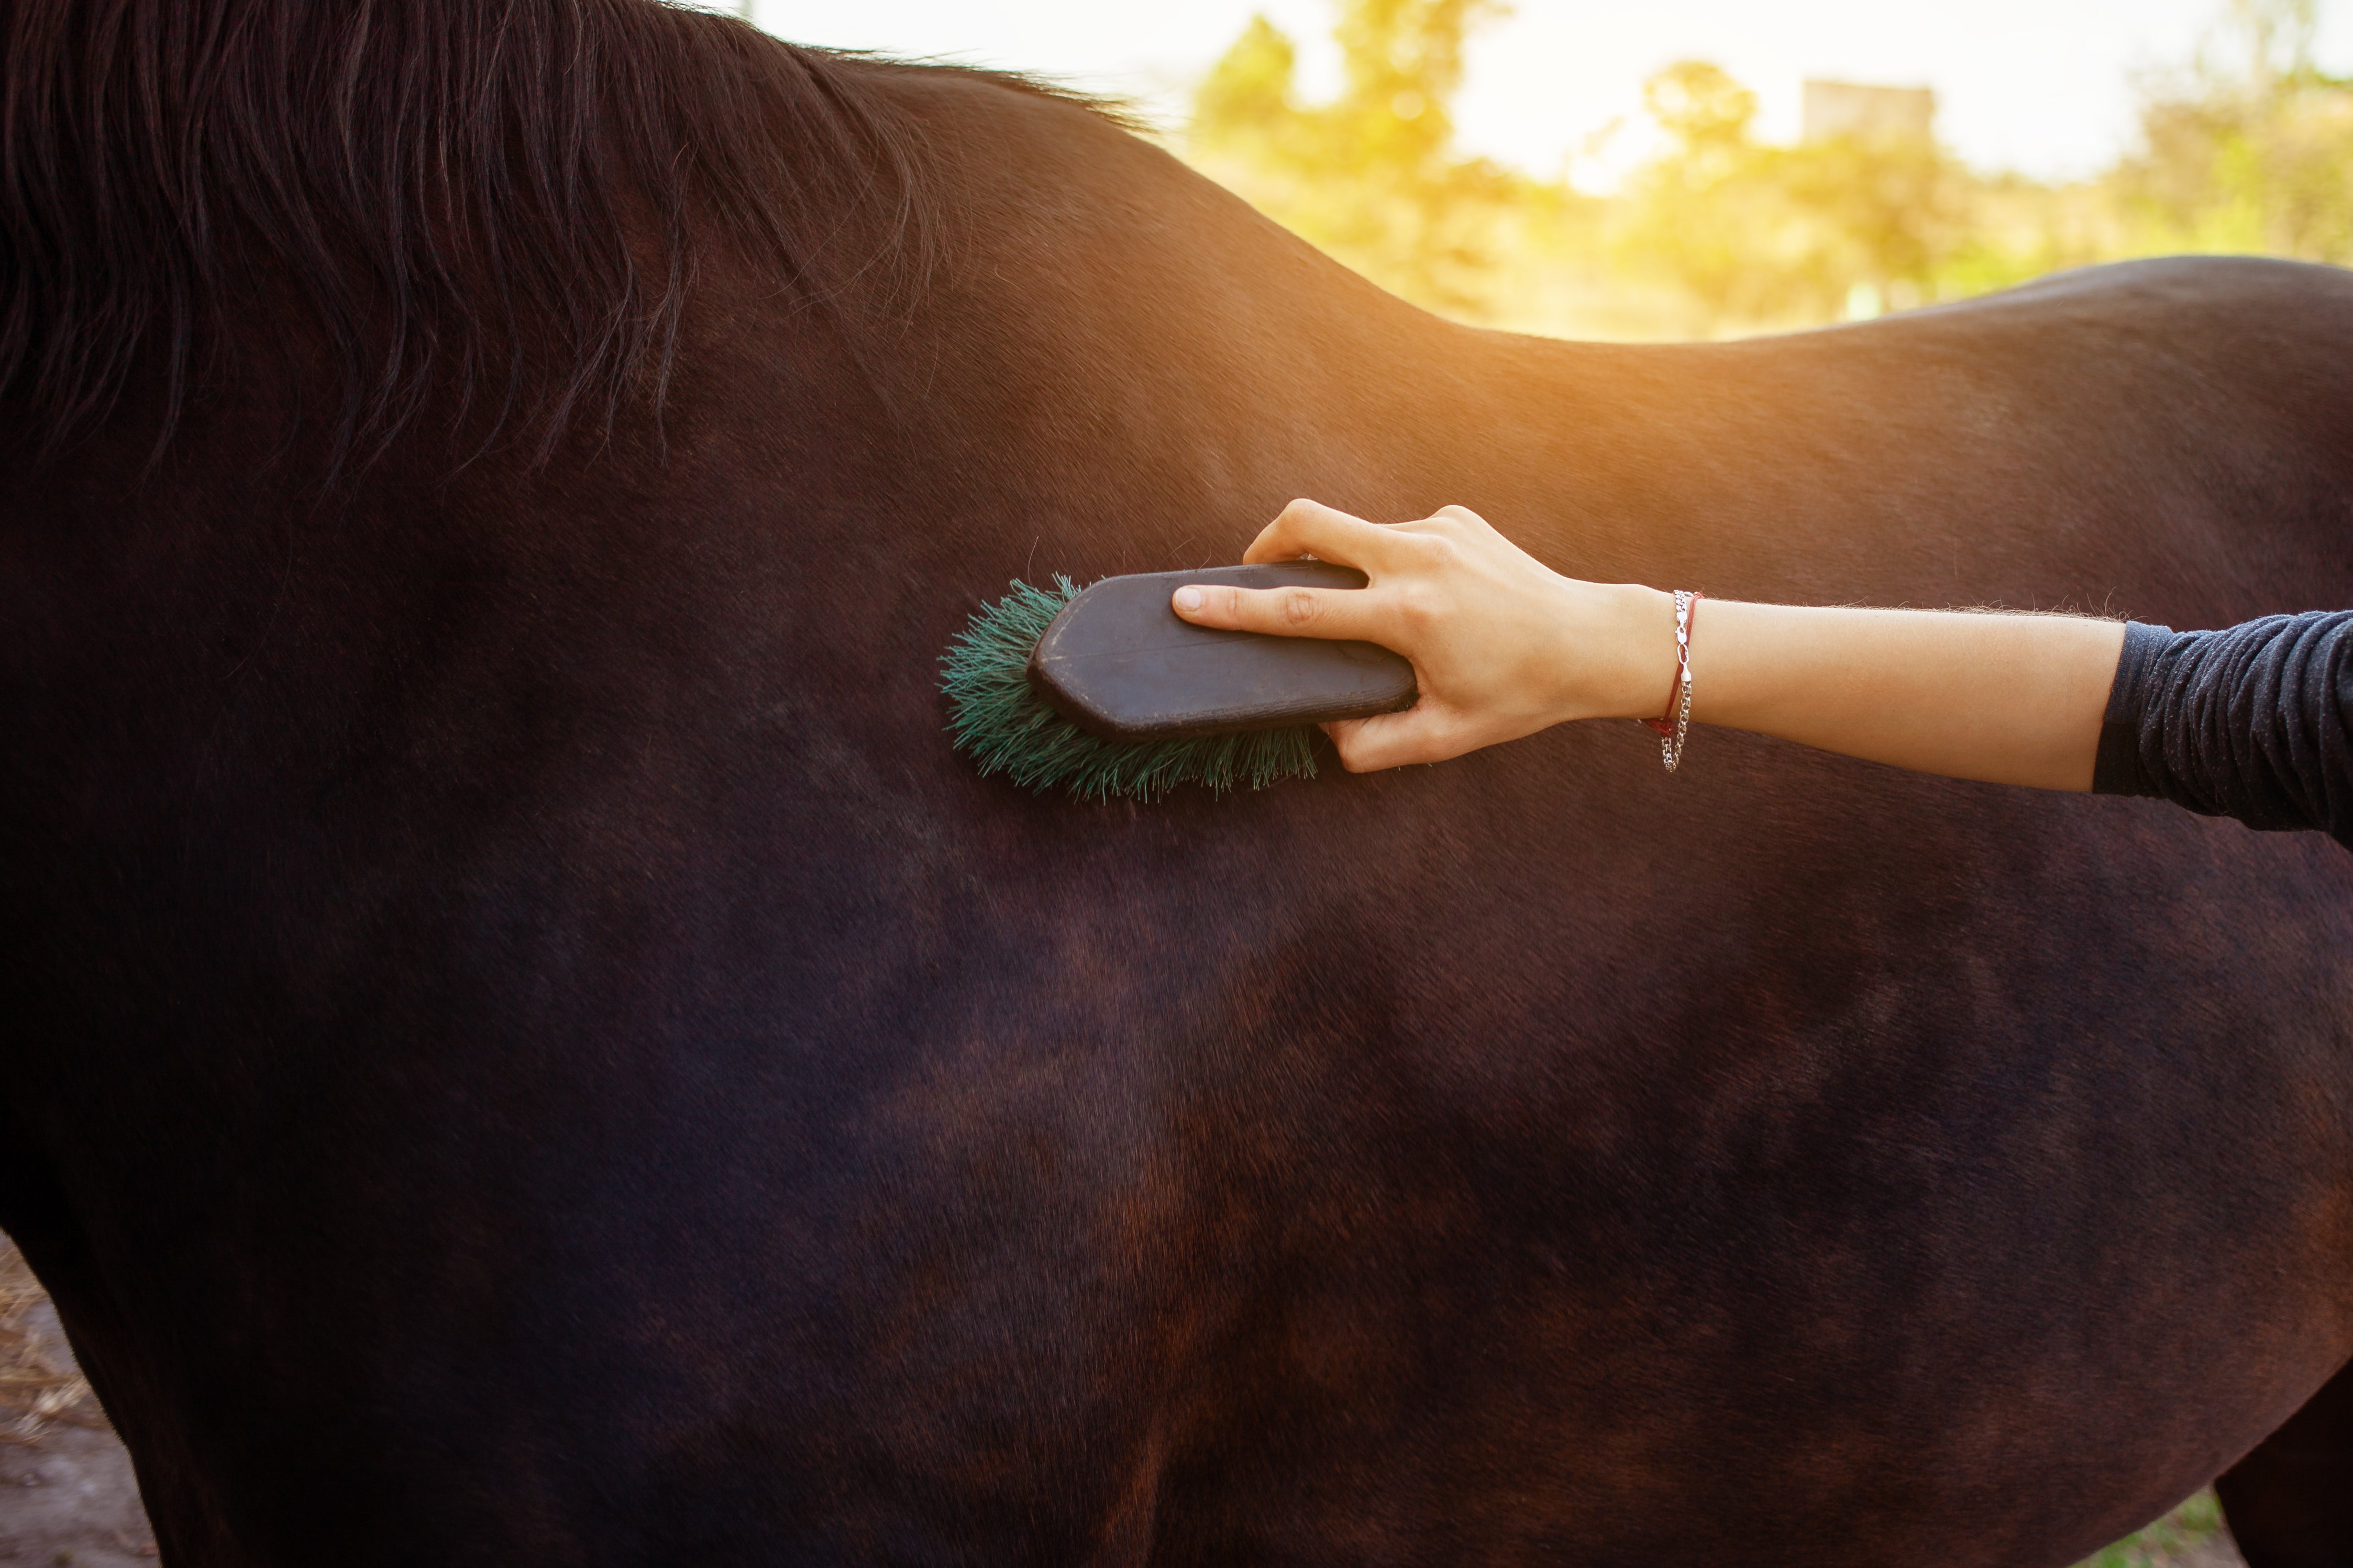 A lady brushes her horse